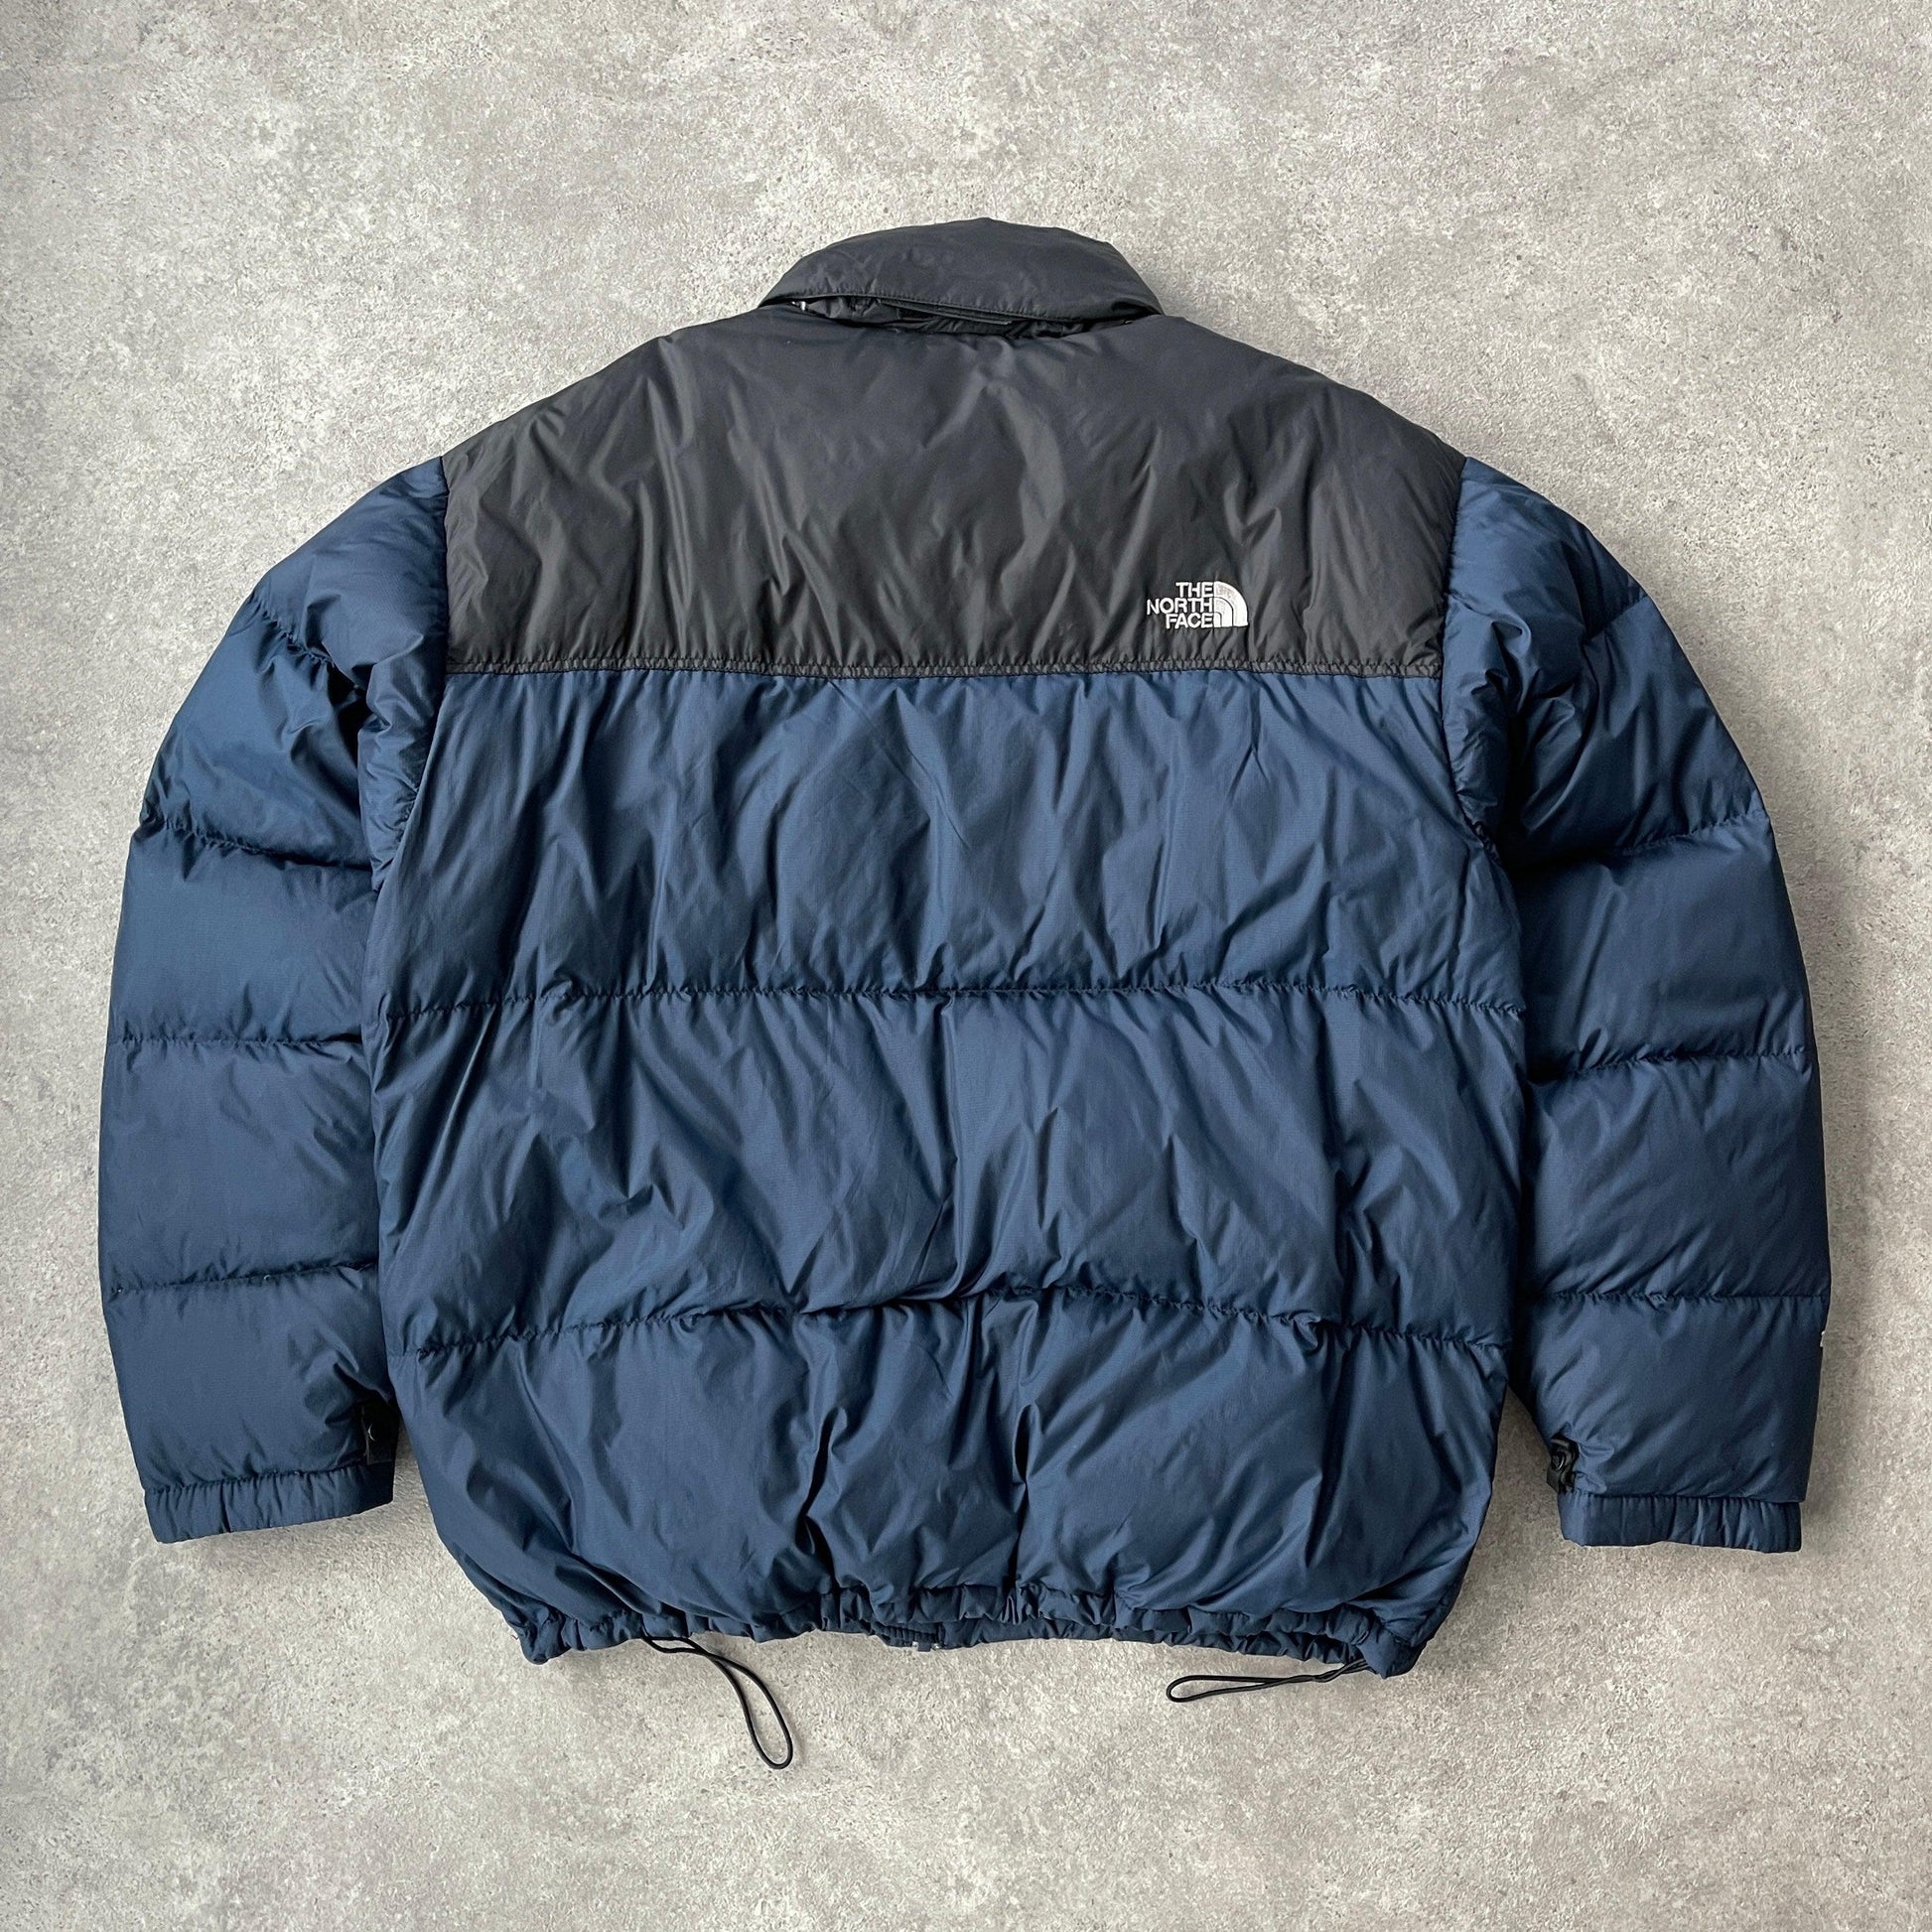 The North Face Nuptse 700 down fill puffer jacket (XL) - Known Source